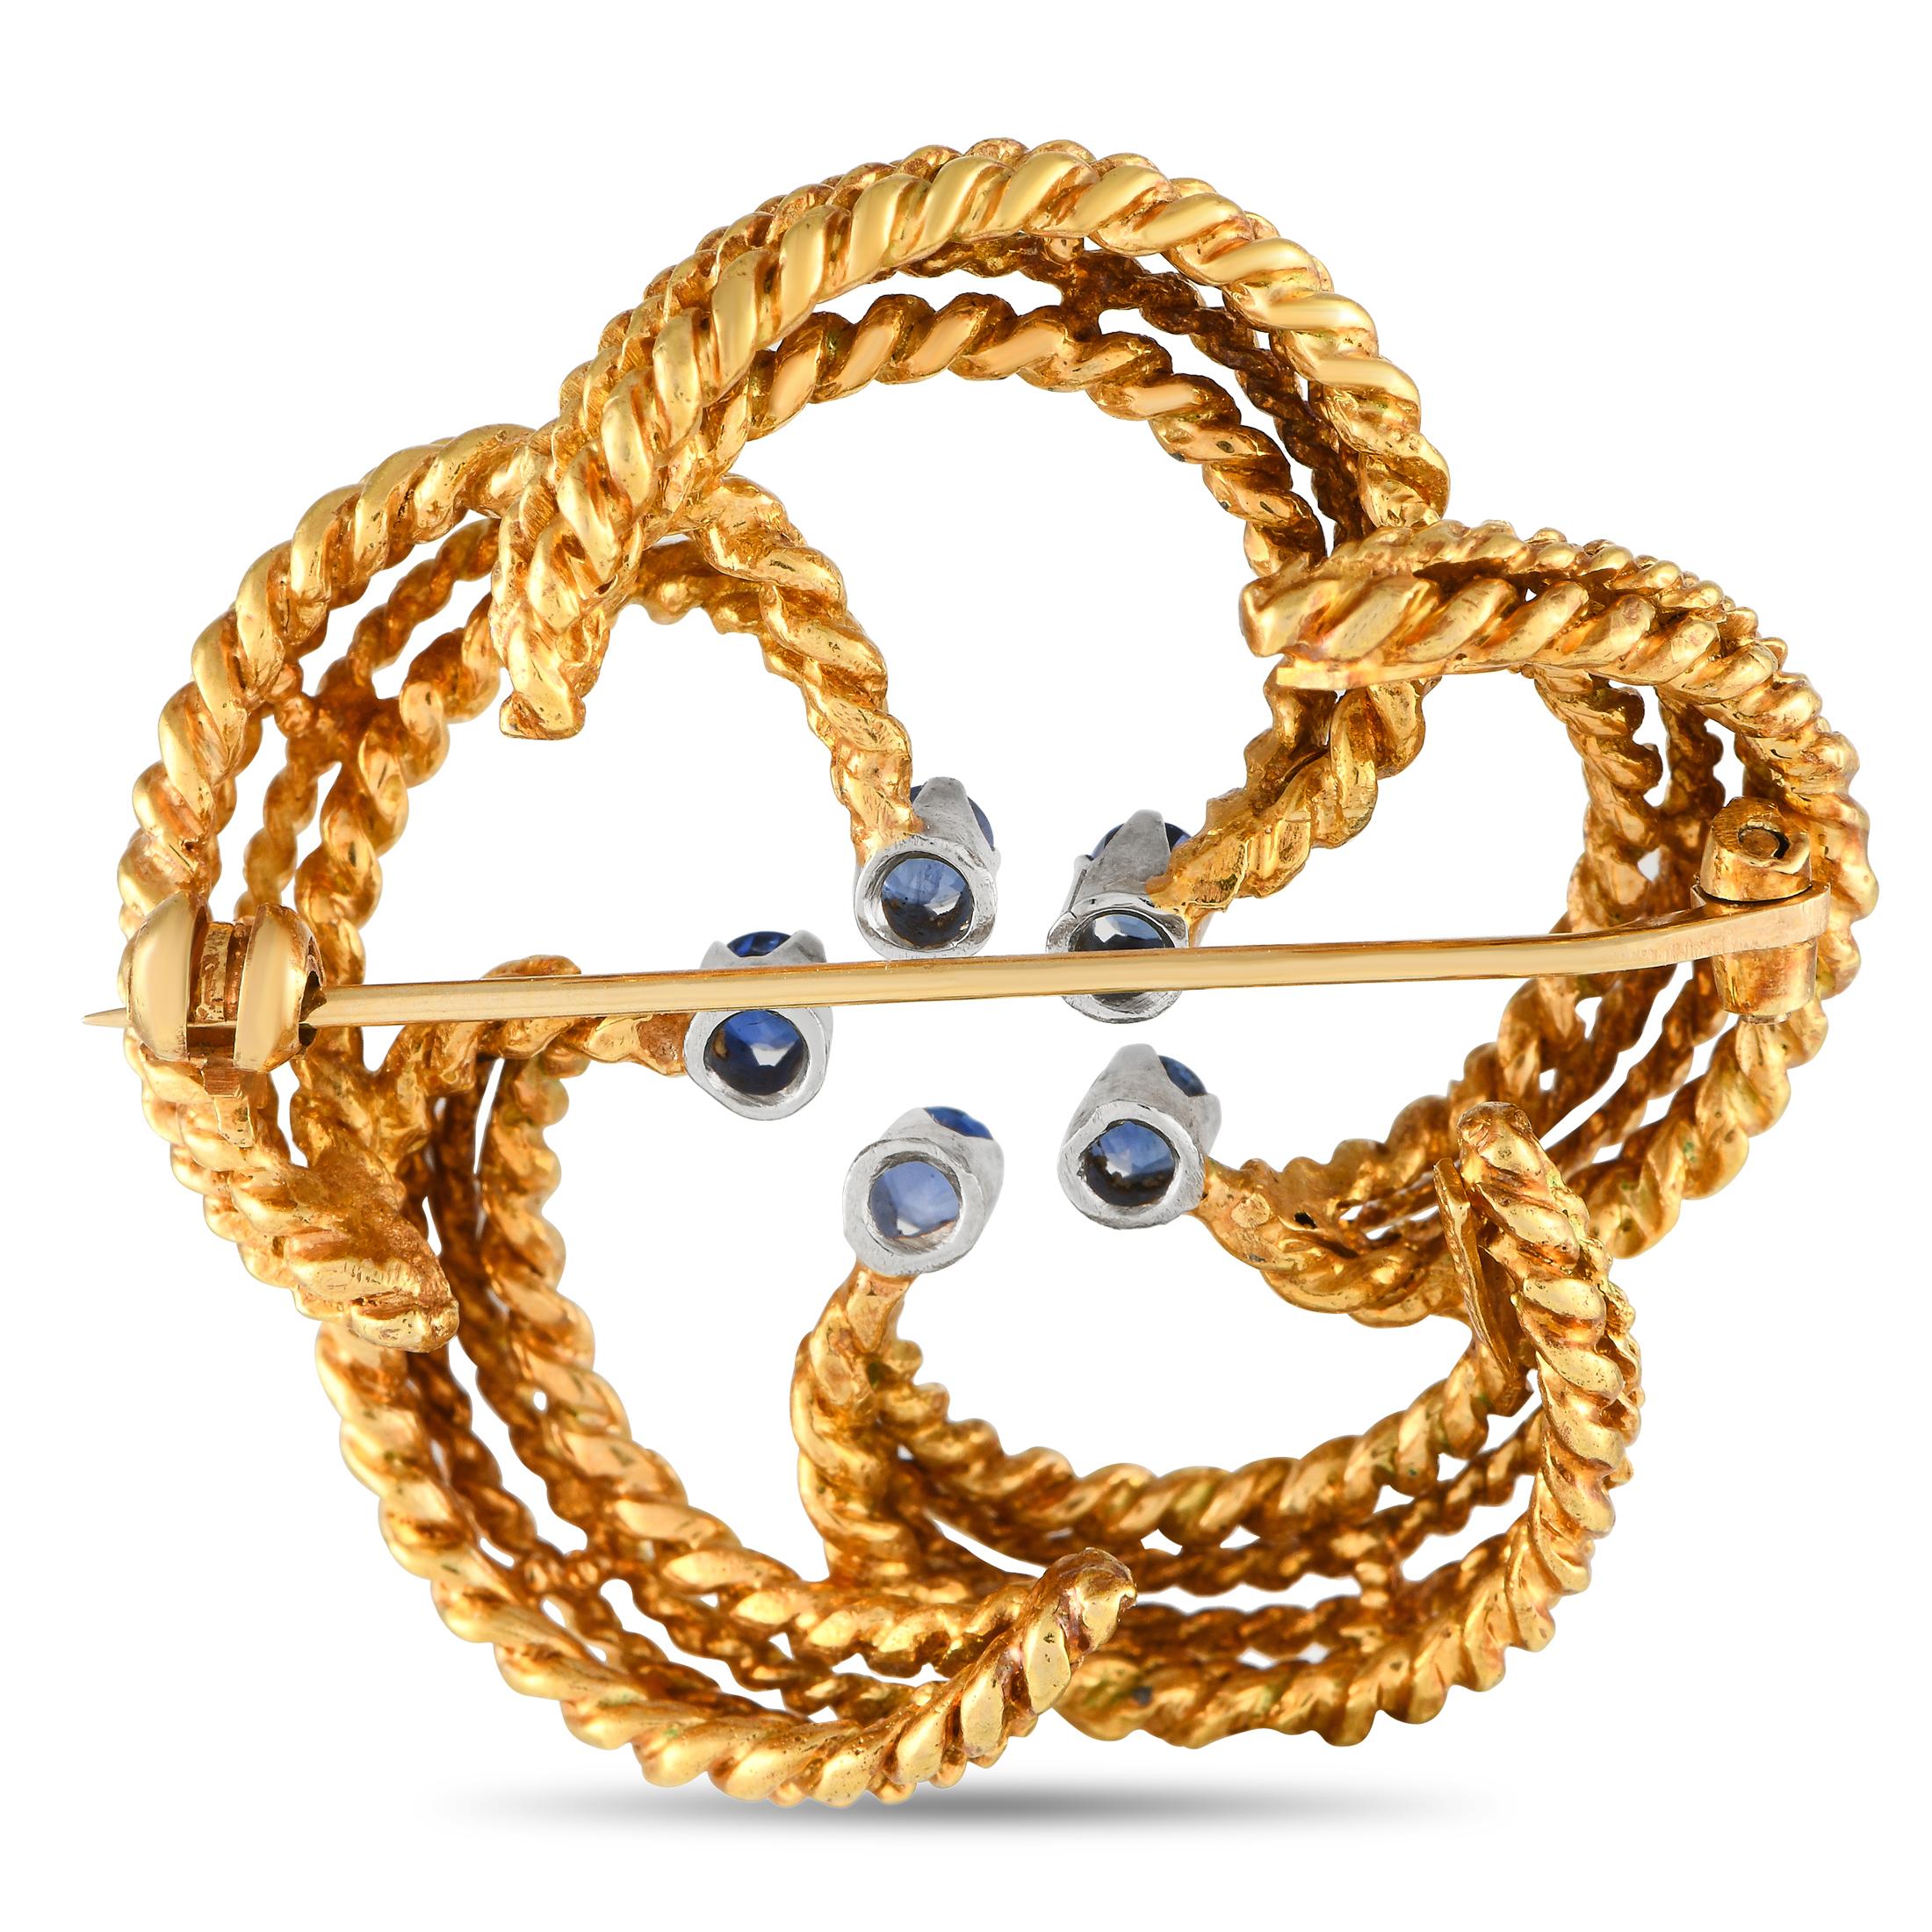 Intricate metalwork, curved lines, and captivating Sapphire gemstones come together to make this vintage Tiffany & Co. brooch simply unforgettable. Crafted from opulent 18K Yellow Gold, it measures 1.45 round and will secure easily to any scarf,